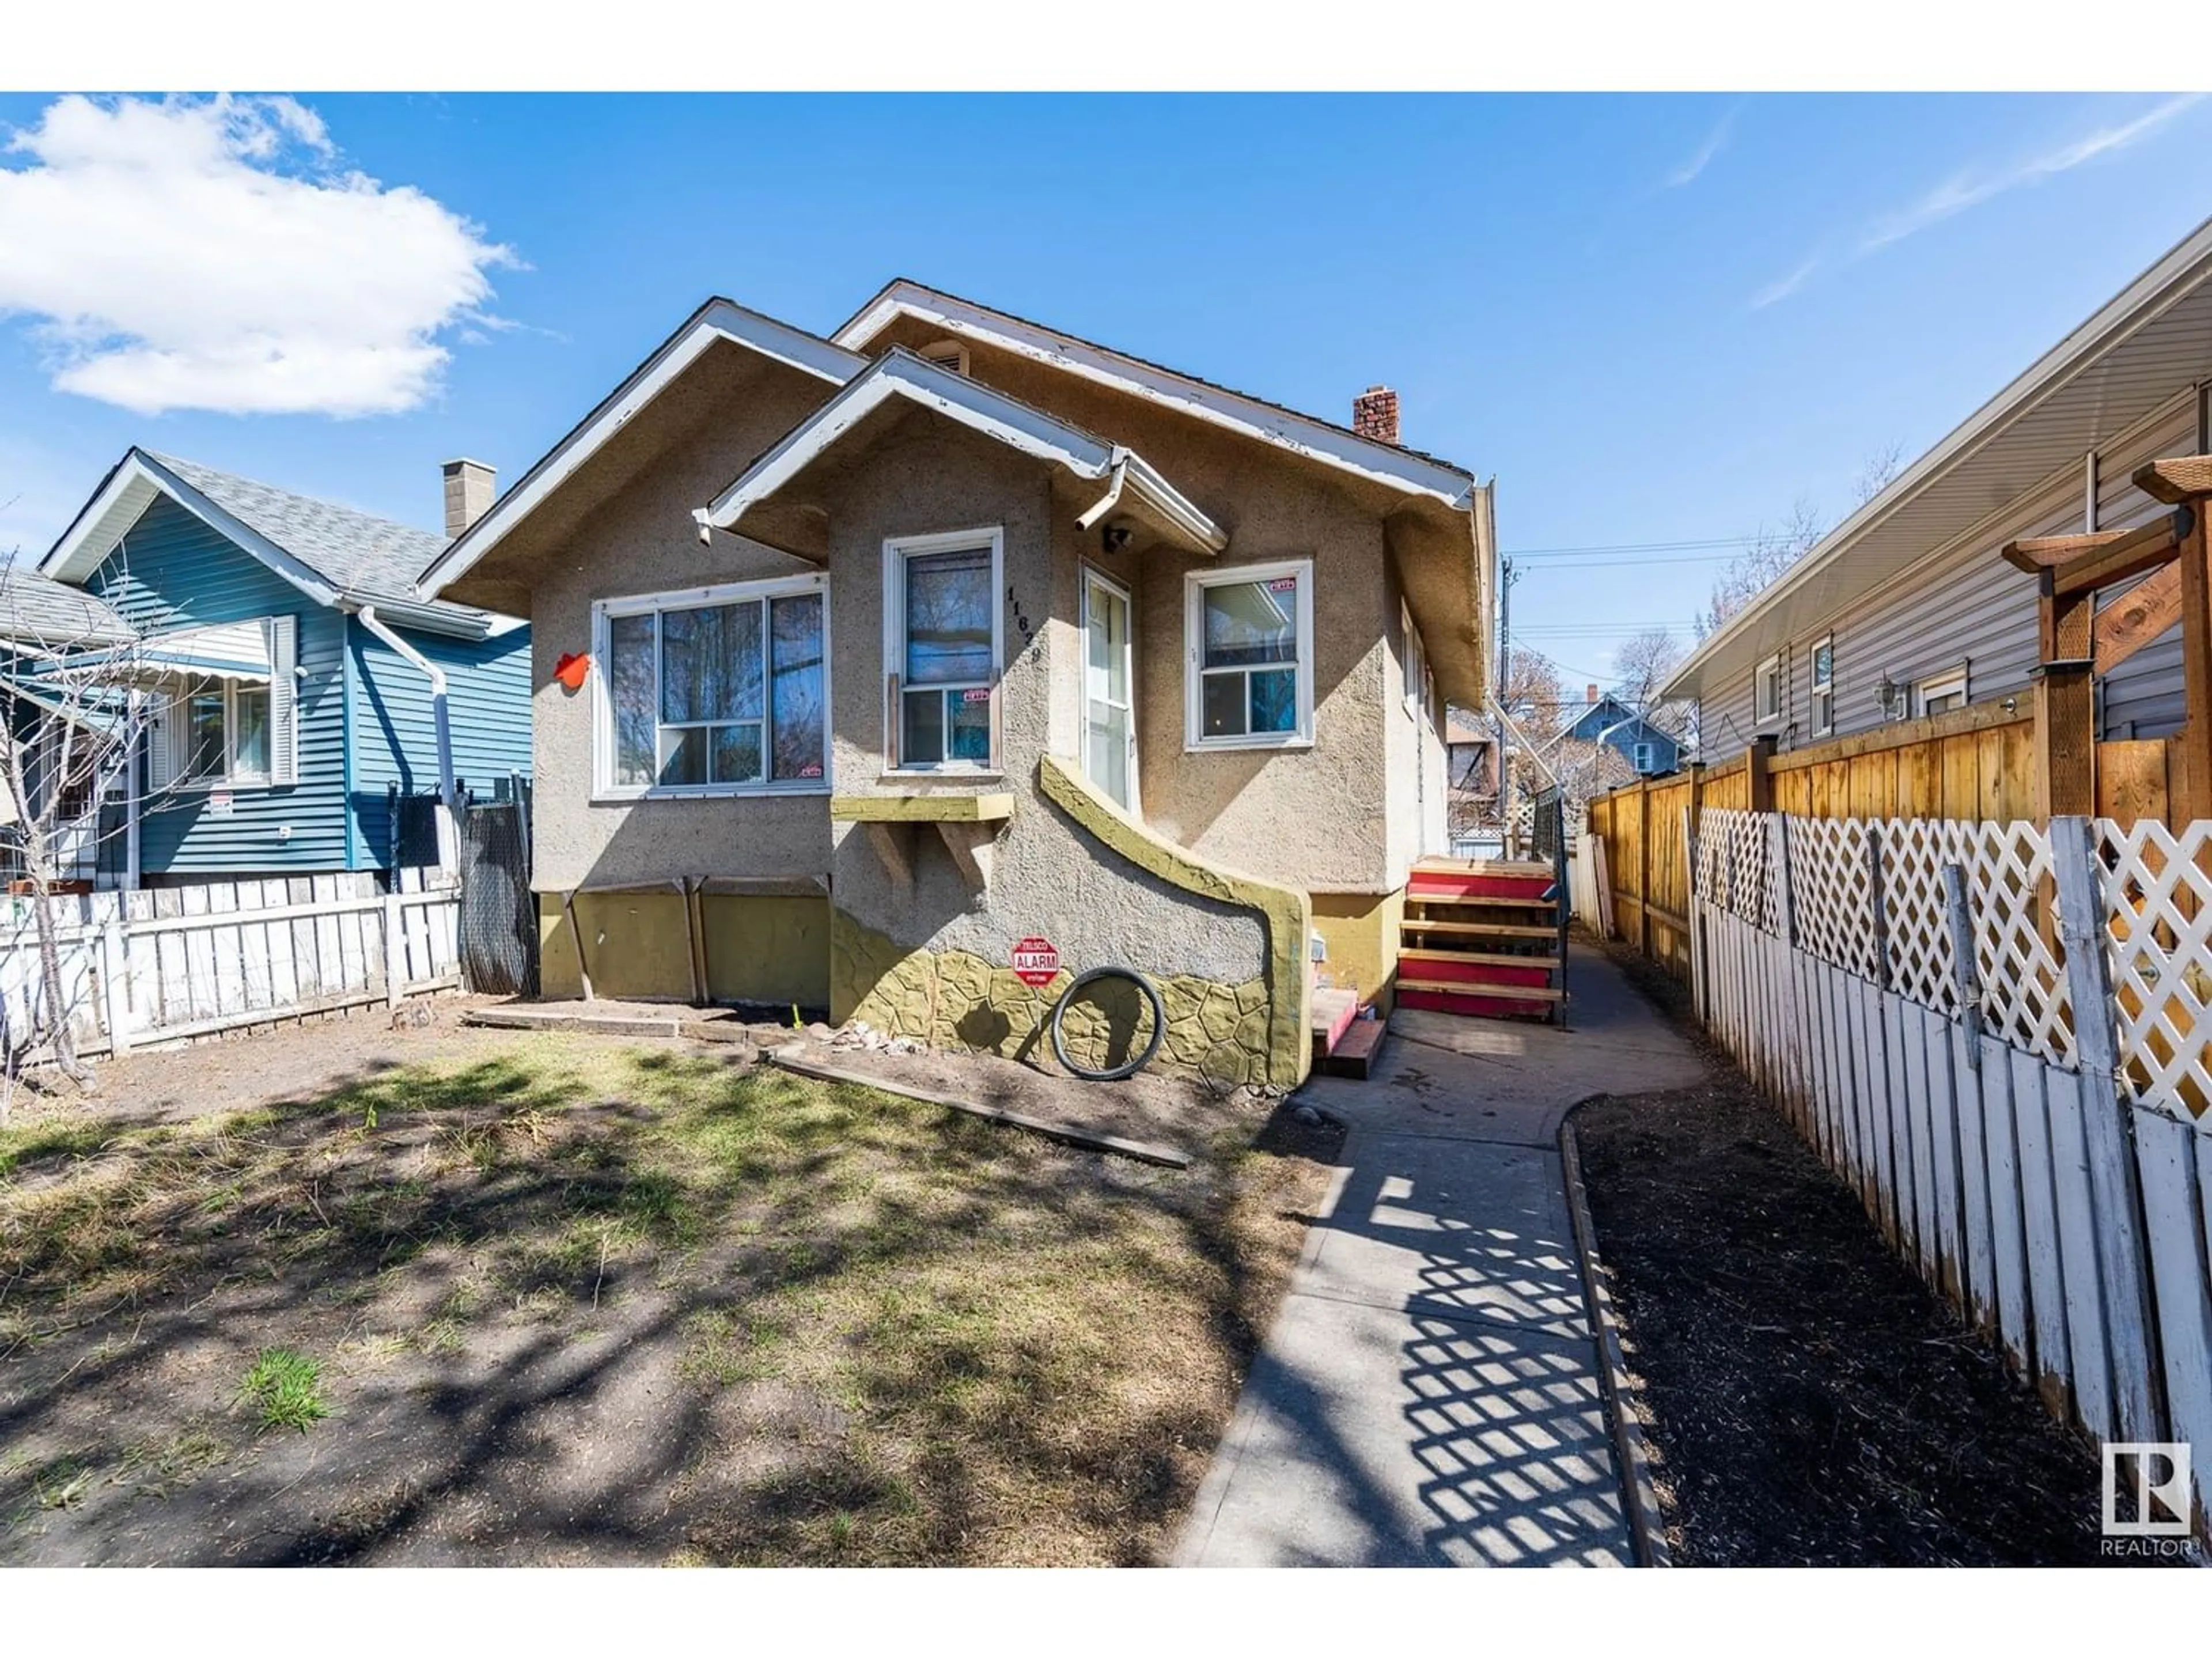 Frontside or backside of a home for 11639 97 ST NW, Edmonton Alberta T5G1Y1